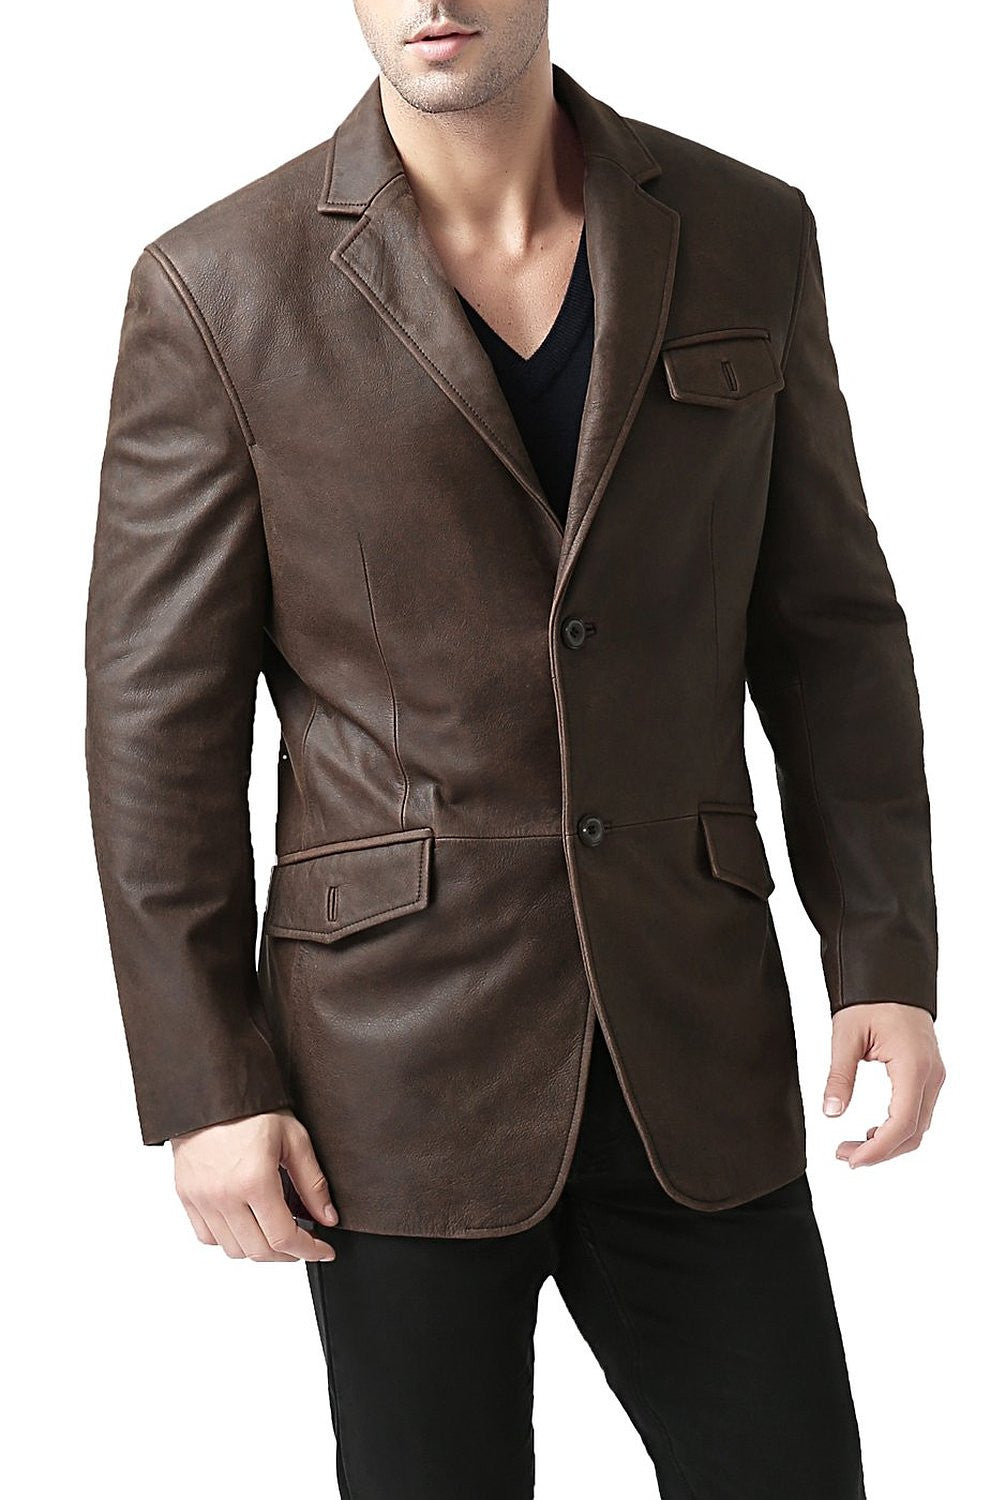 bgsd mens two button cowhide leather blazer